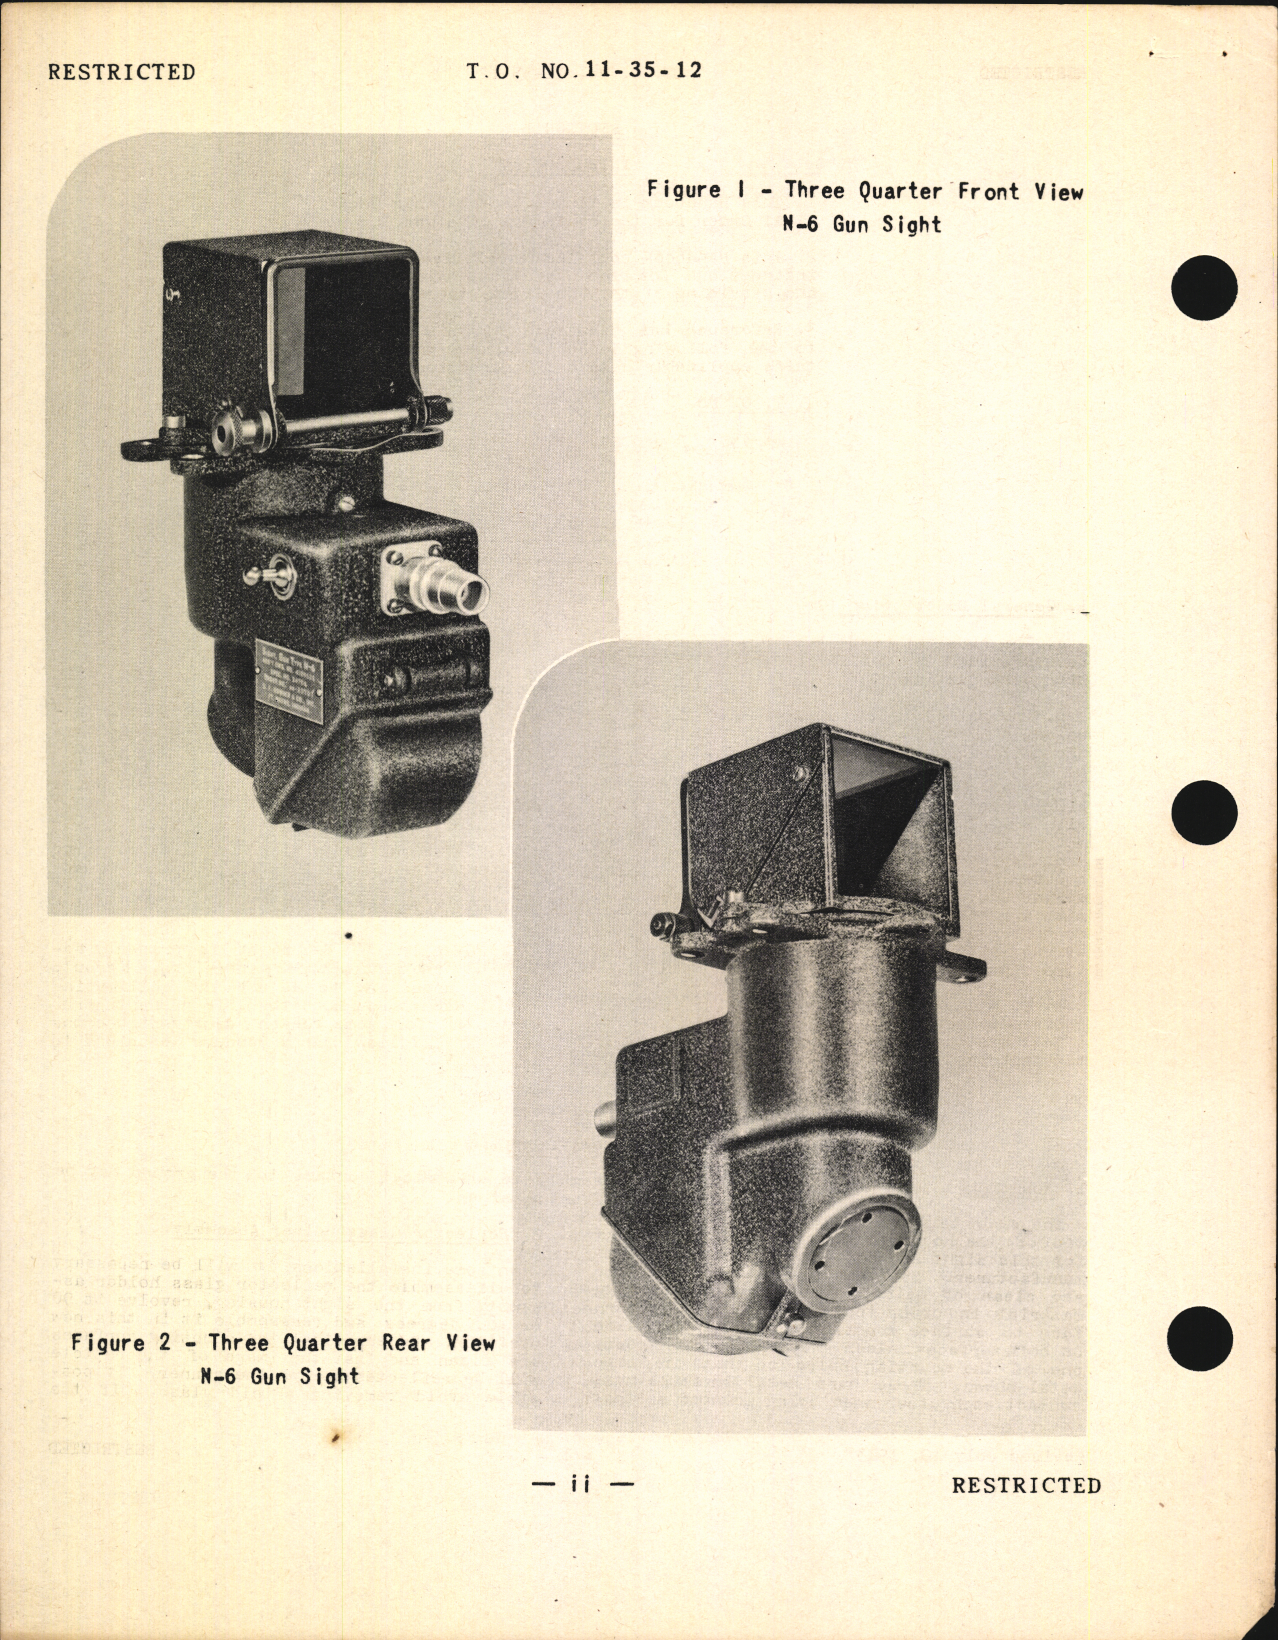 Sample page 6 from AirCorps Library document: Handbook of Instructions with Parts Catalog for Type N-6 Gunsight